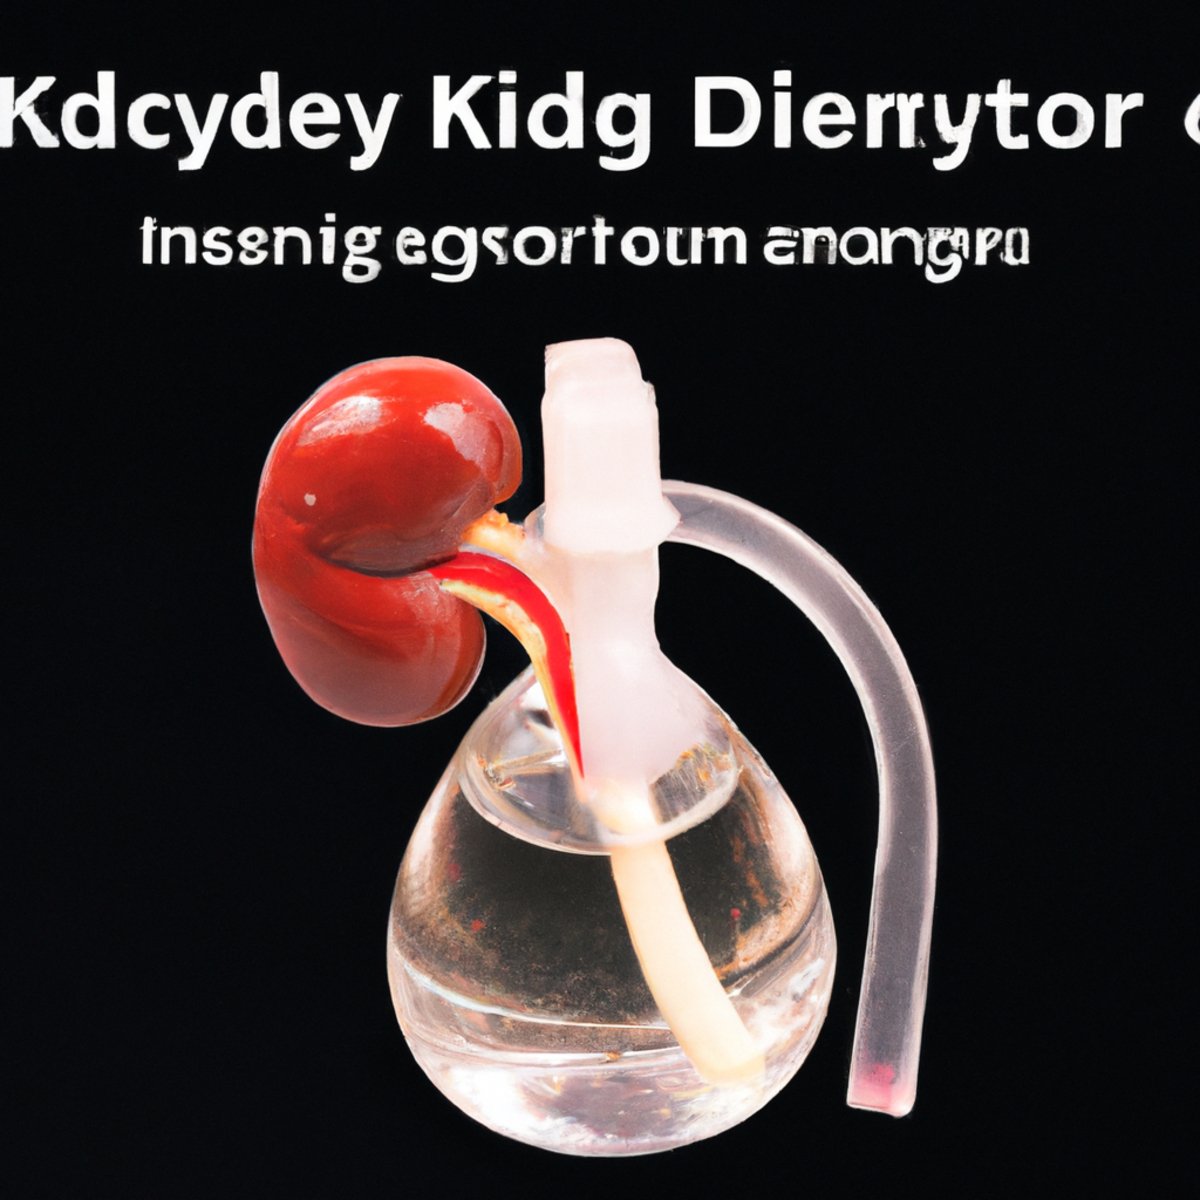 Close-up of kidney-shaped glass container filled with clear liquid, red droplets suspended, highlighting damage caused by Fabry Disease.